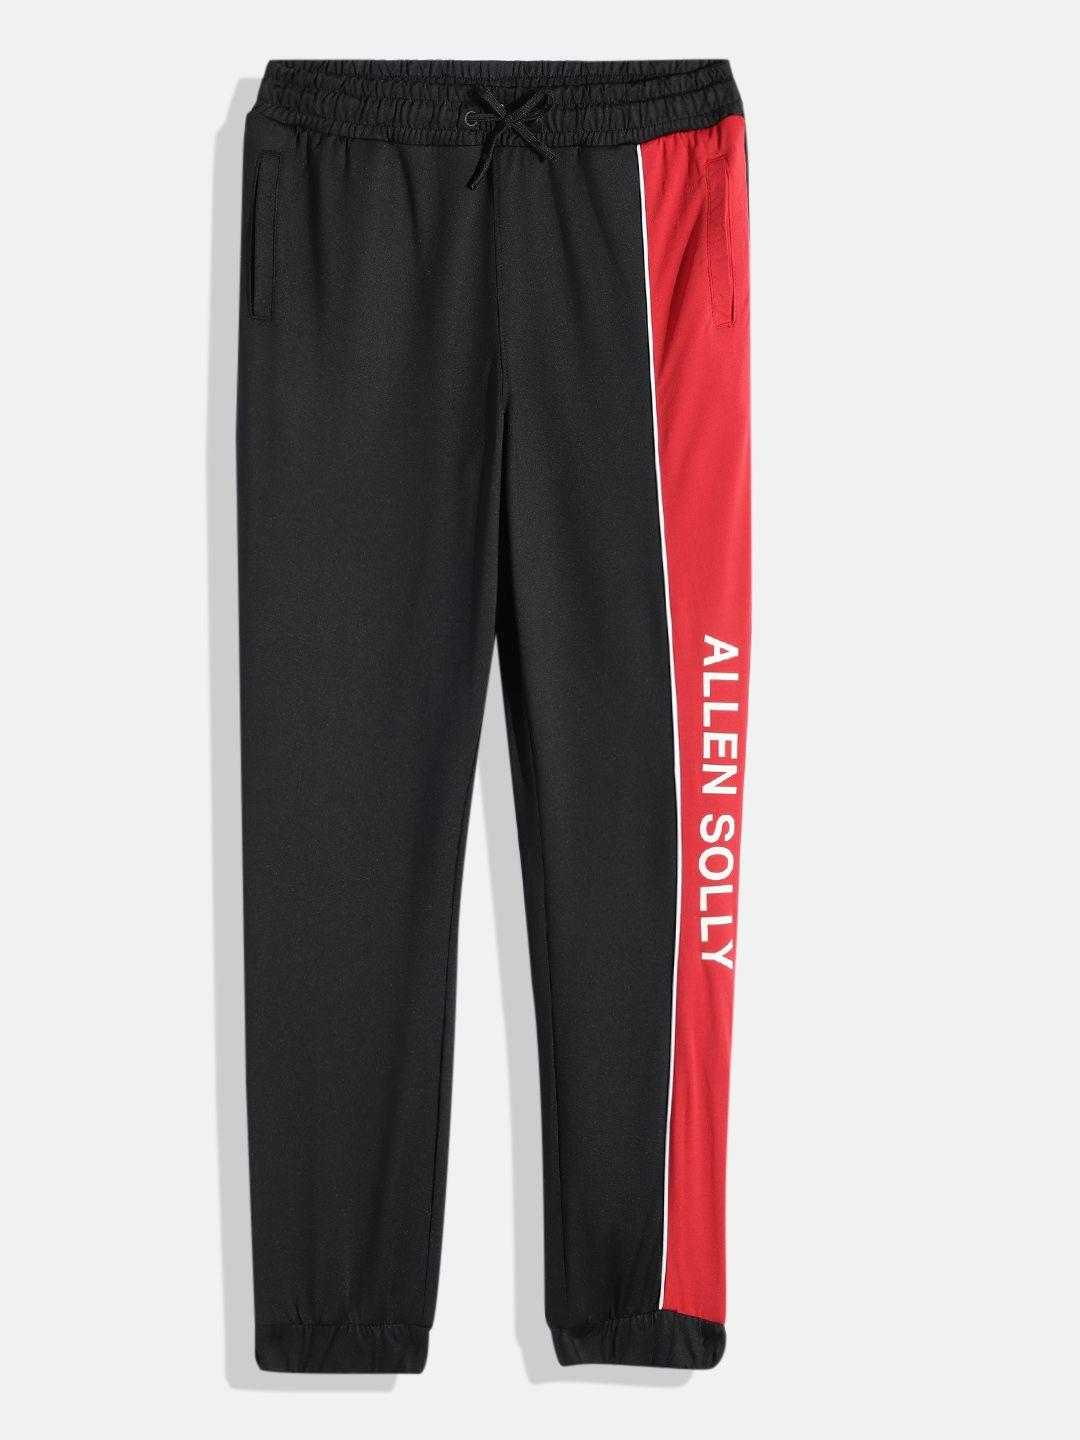 allen solly junior boys solid mid-rise sports joggers with side taping & brand logo print